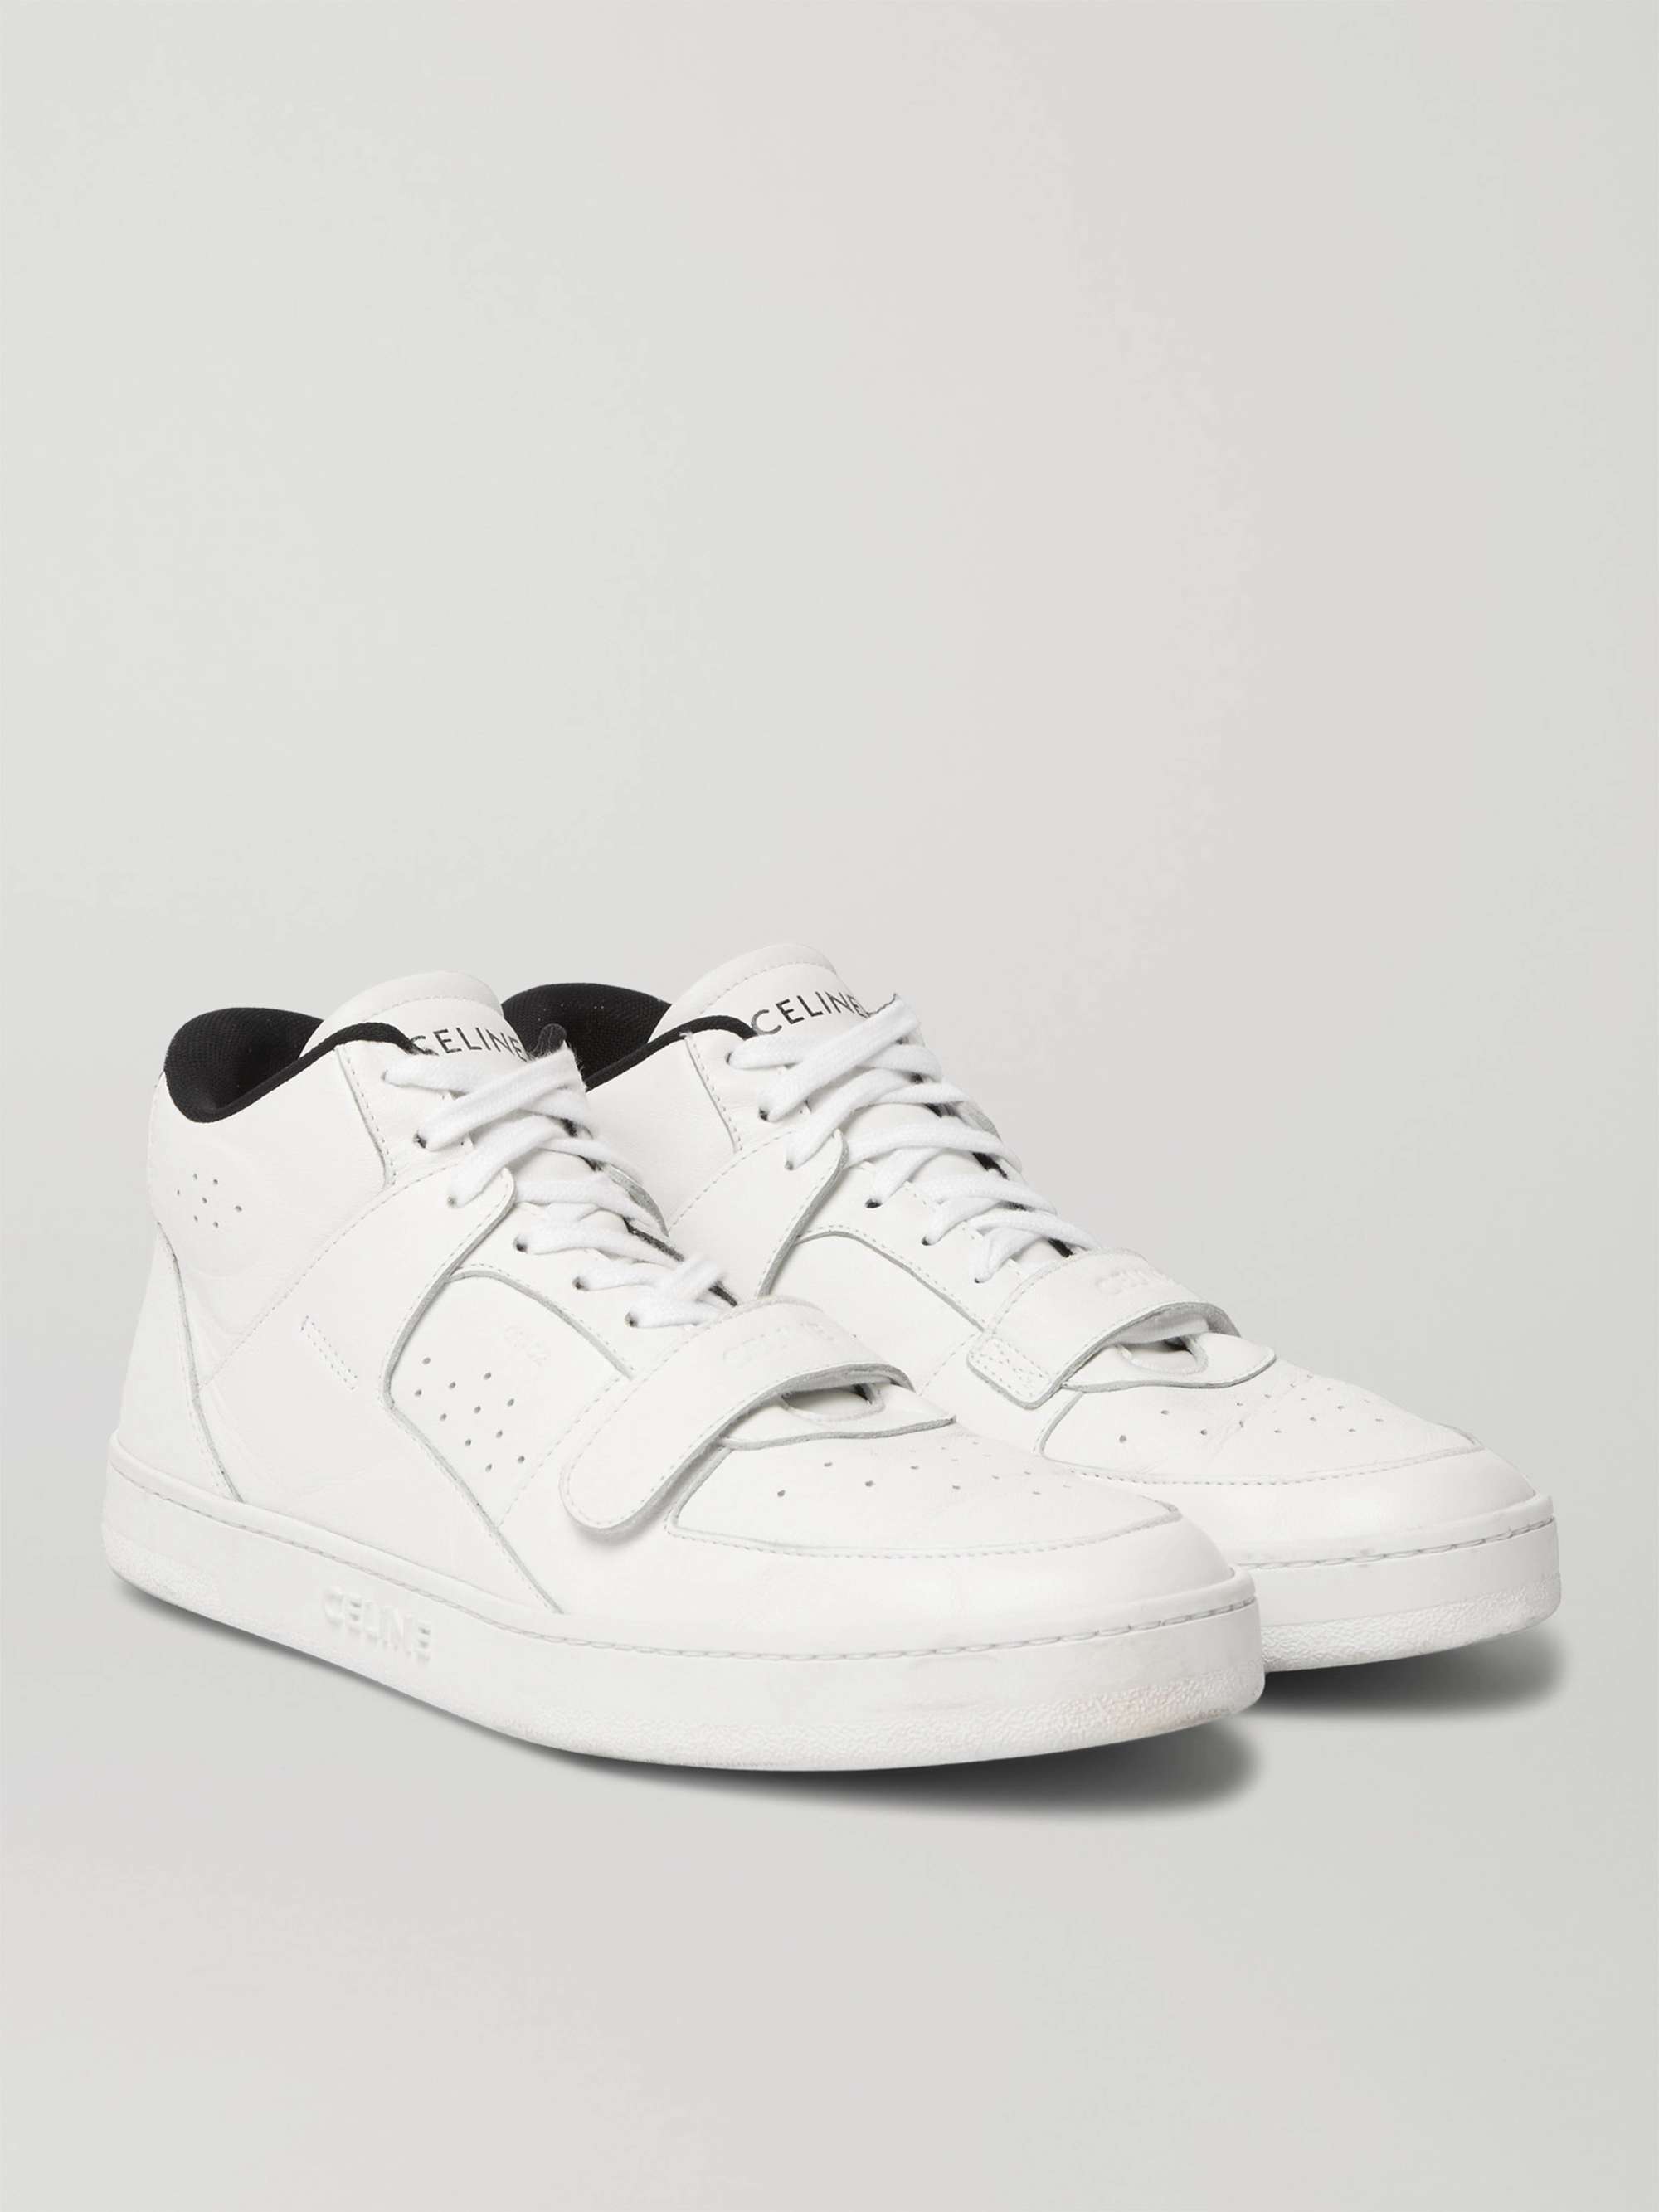 CELINE HOMME CT-02 Leather High-Top Sneakers